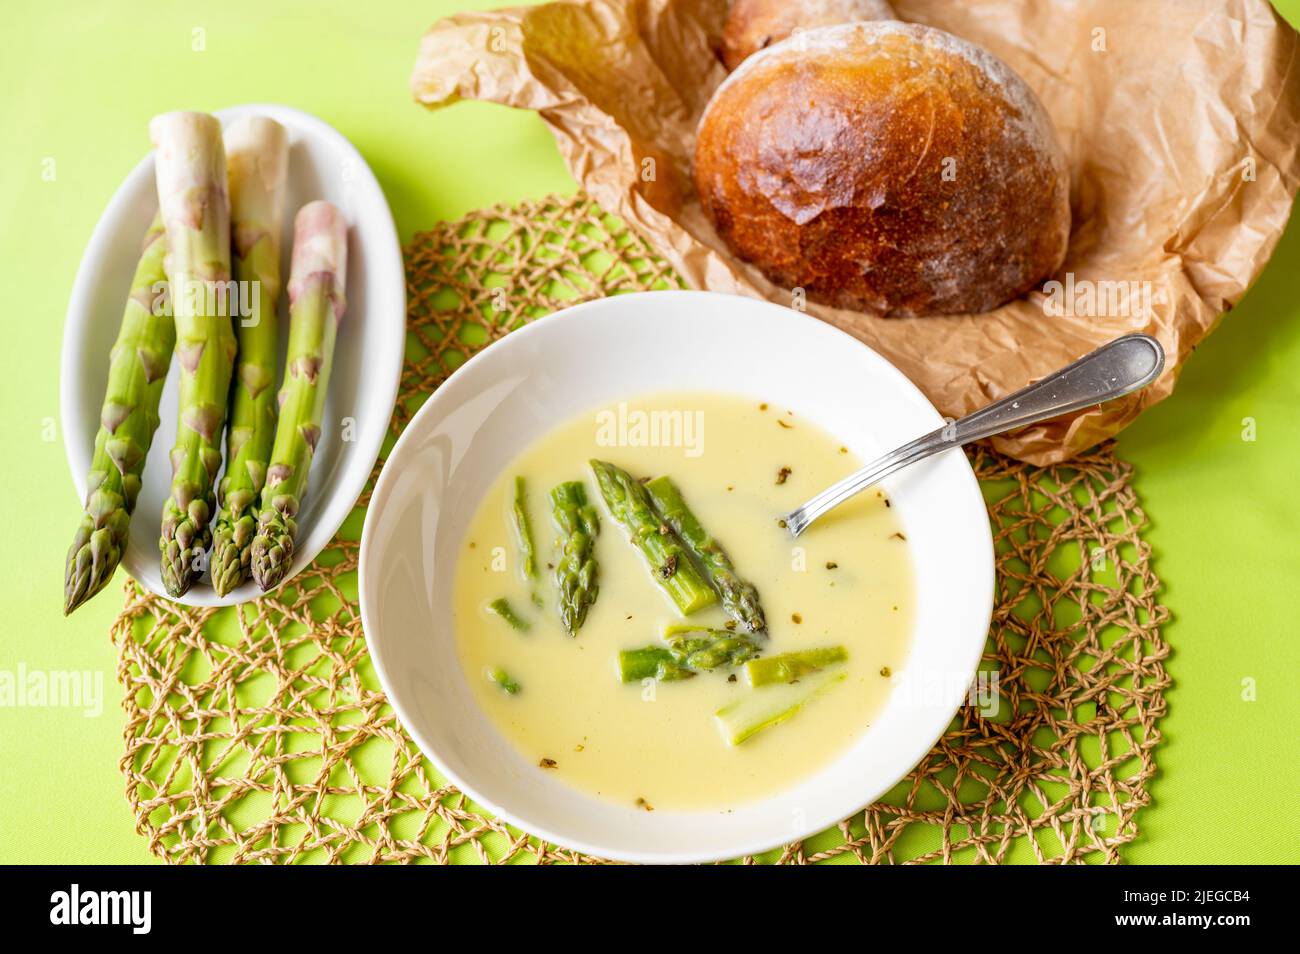 Asparagus soup in plate, boiled asparagus on bowl and loaf of bread on paper on green background. Stock Photo